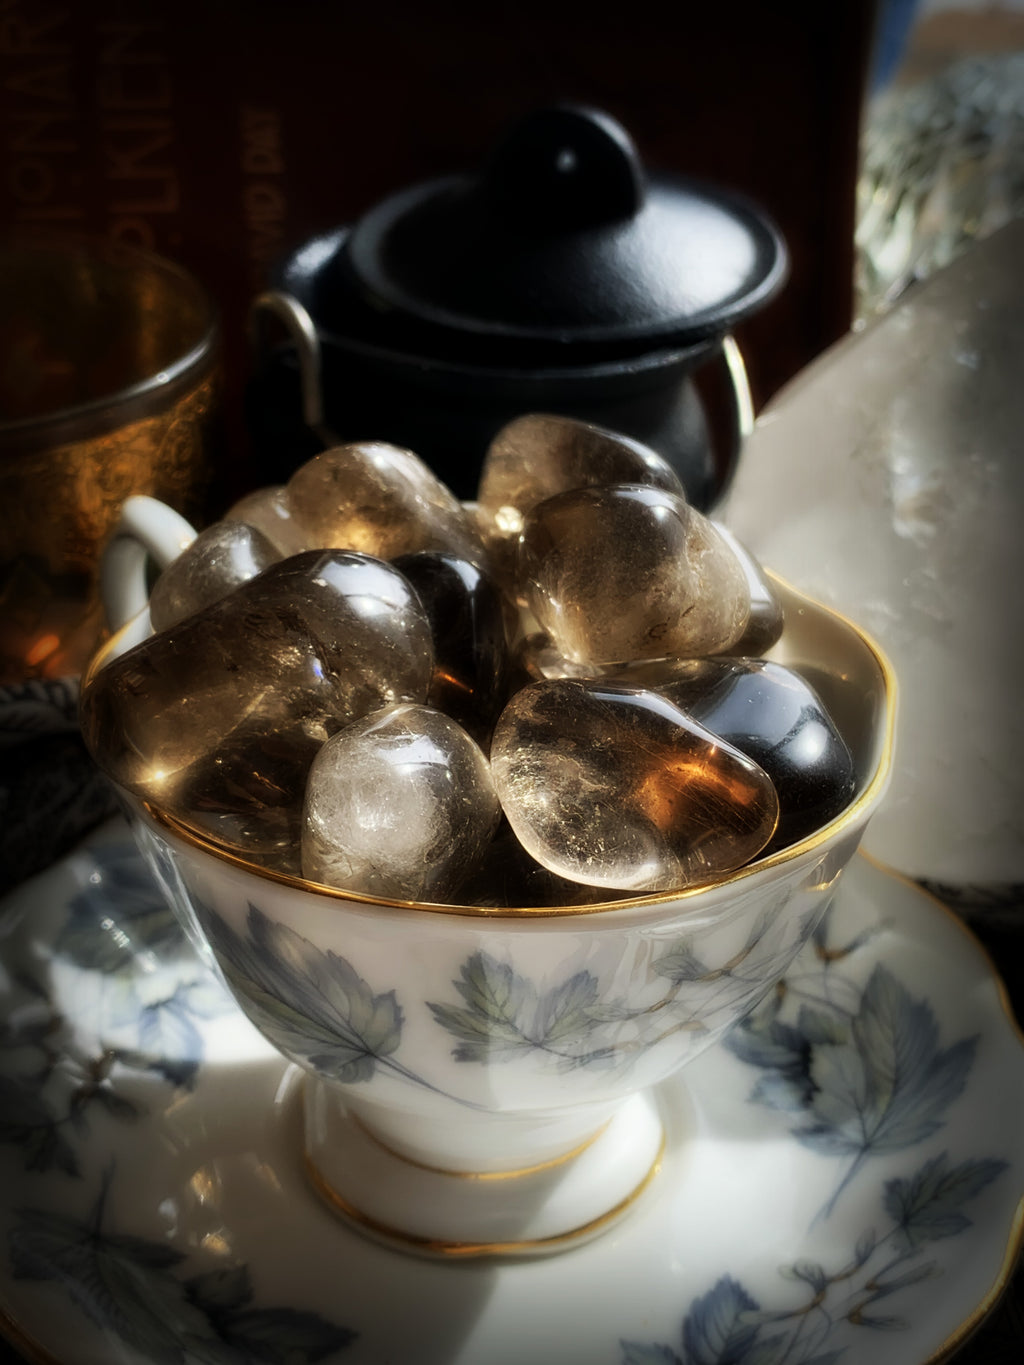 SMOKY QUARTZ TUMBLED CRYSTAL ~ For Grounding and Cleansing Negativity